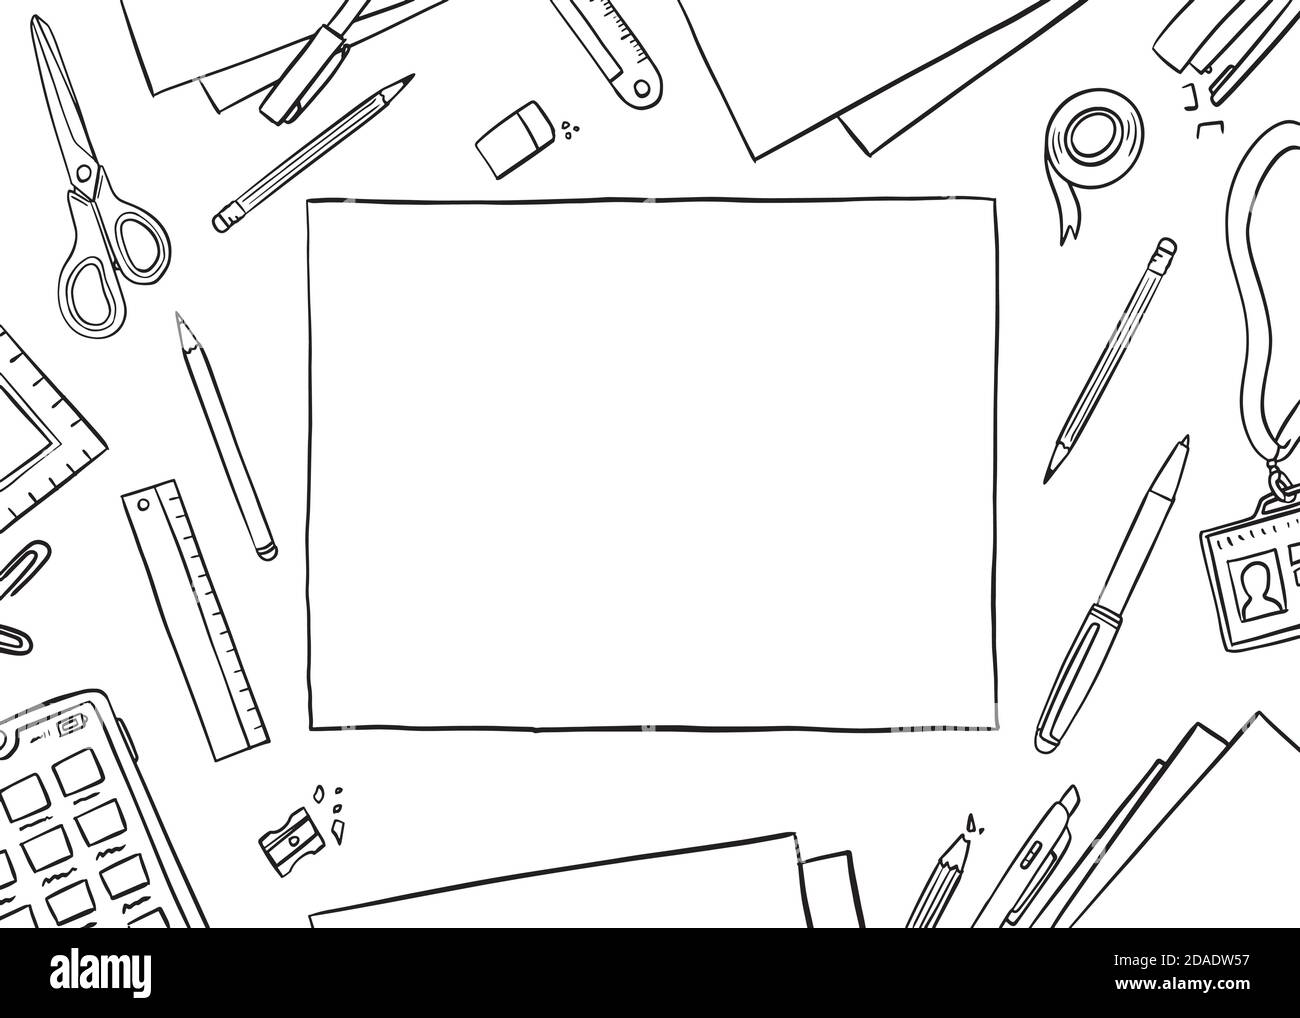 Set of Lines for Drawing with Erasers and Sharpener on a White Background.  Stock Image - Image of education, school: 121036687